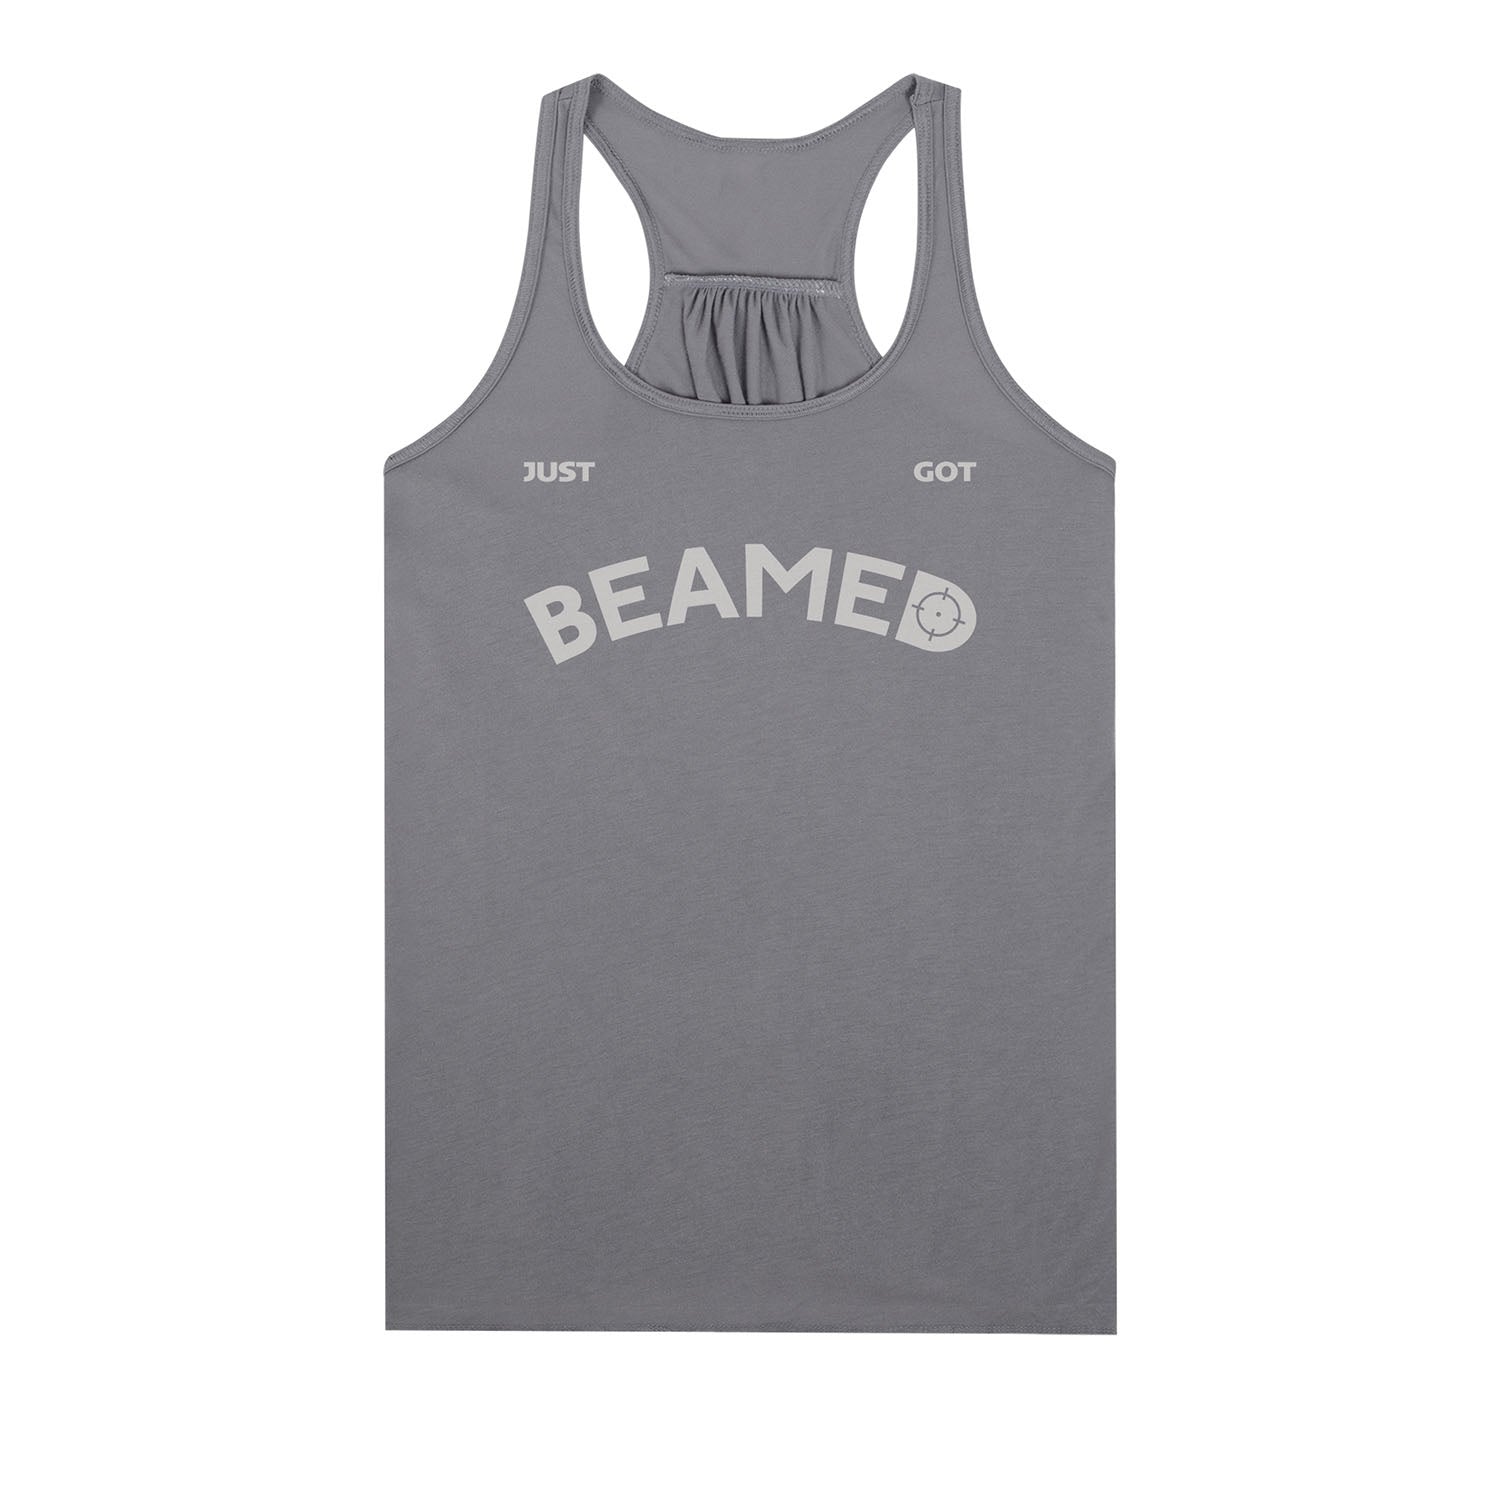 Call of Duty Beamed Women's Grey Tank Top - Front View